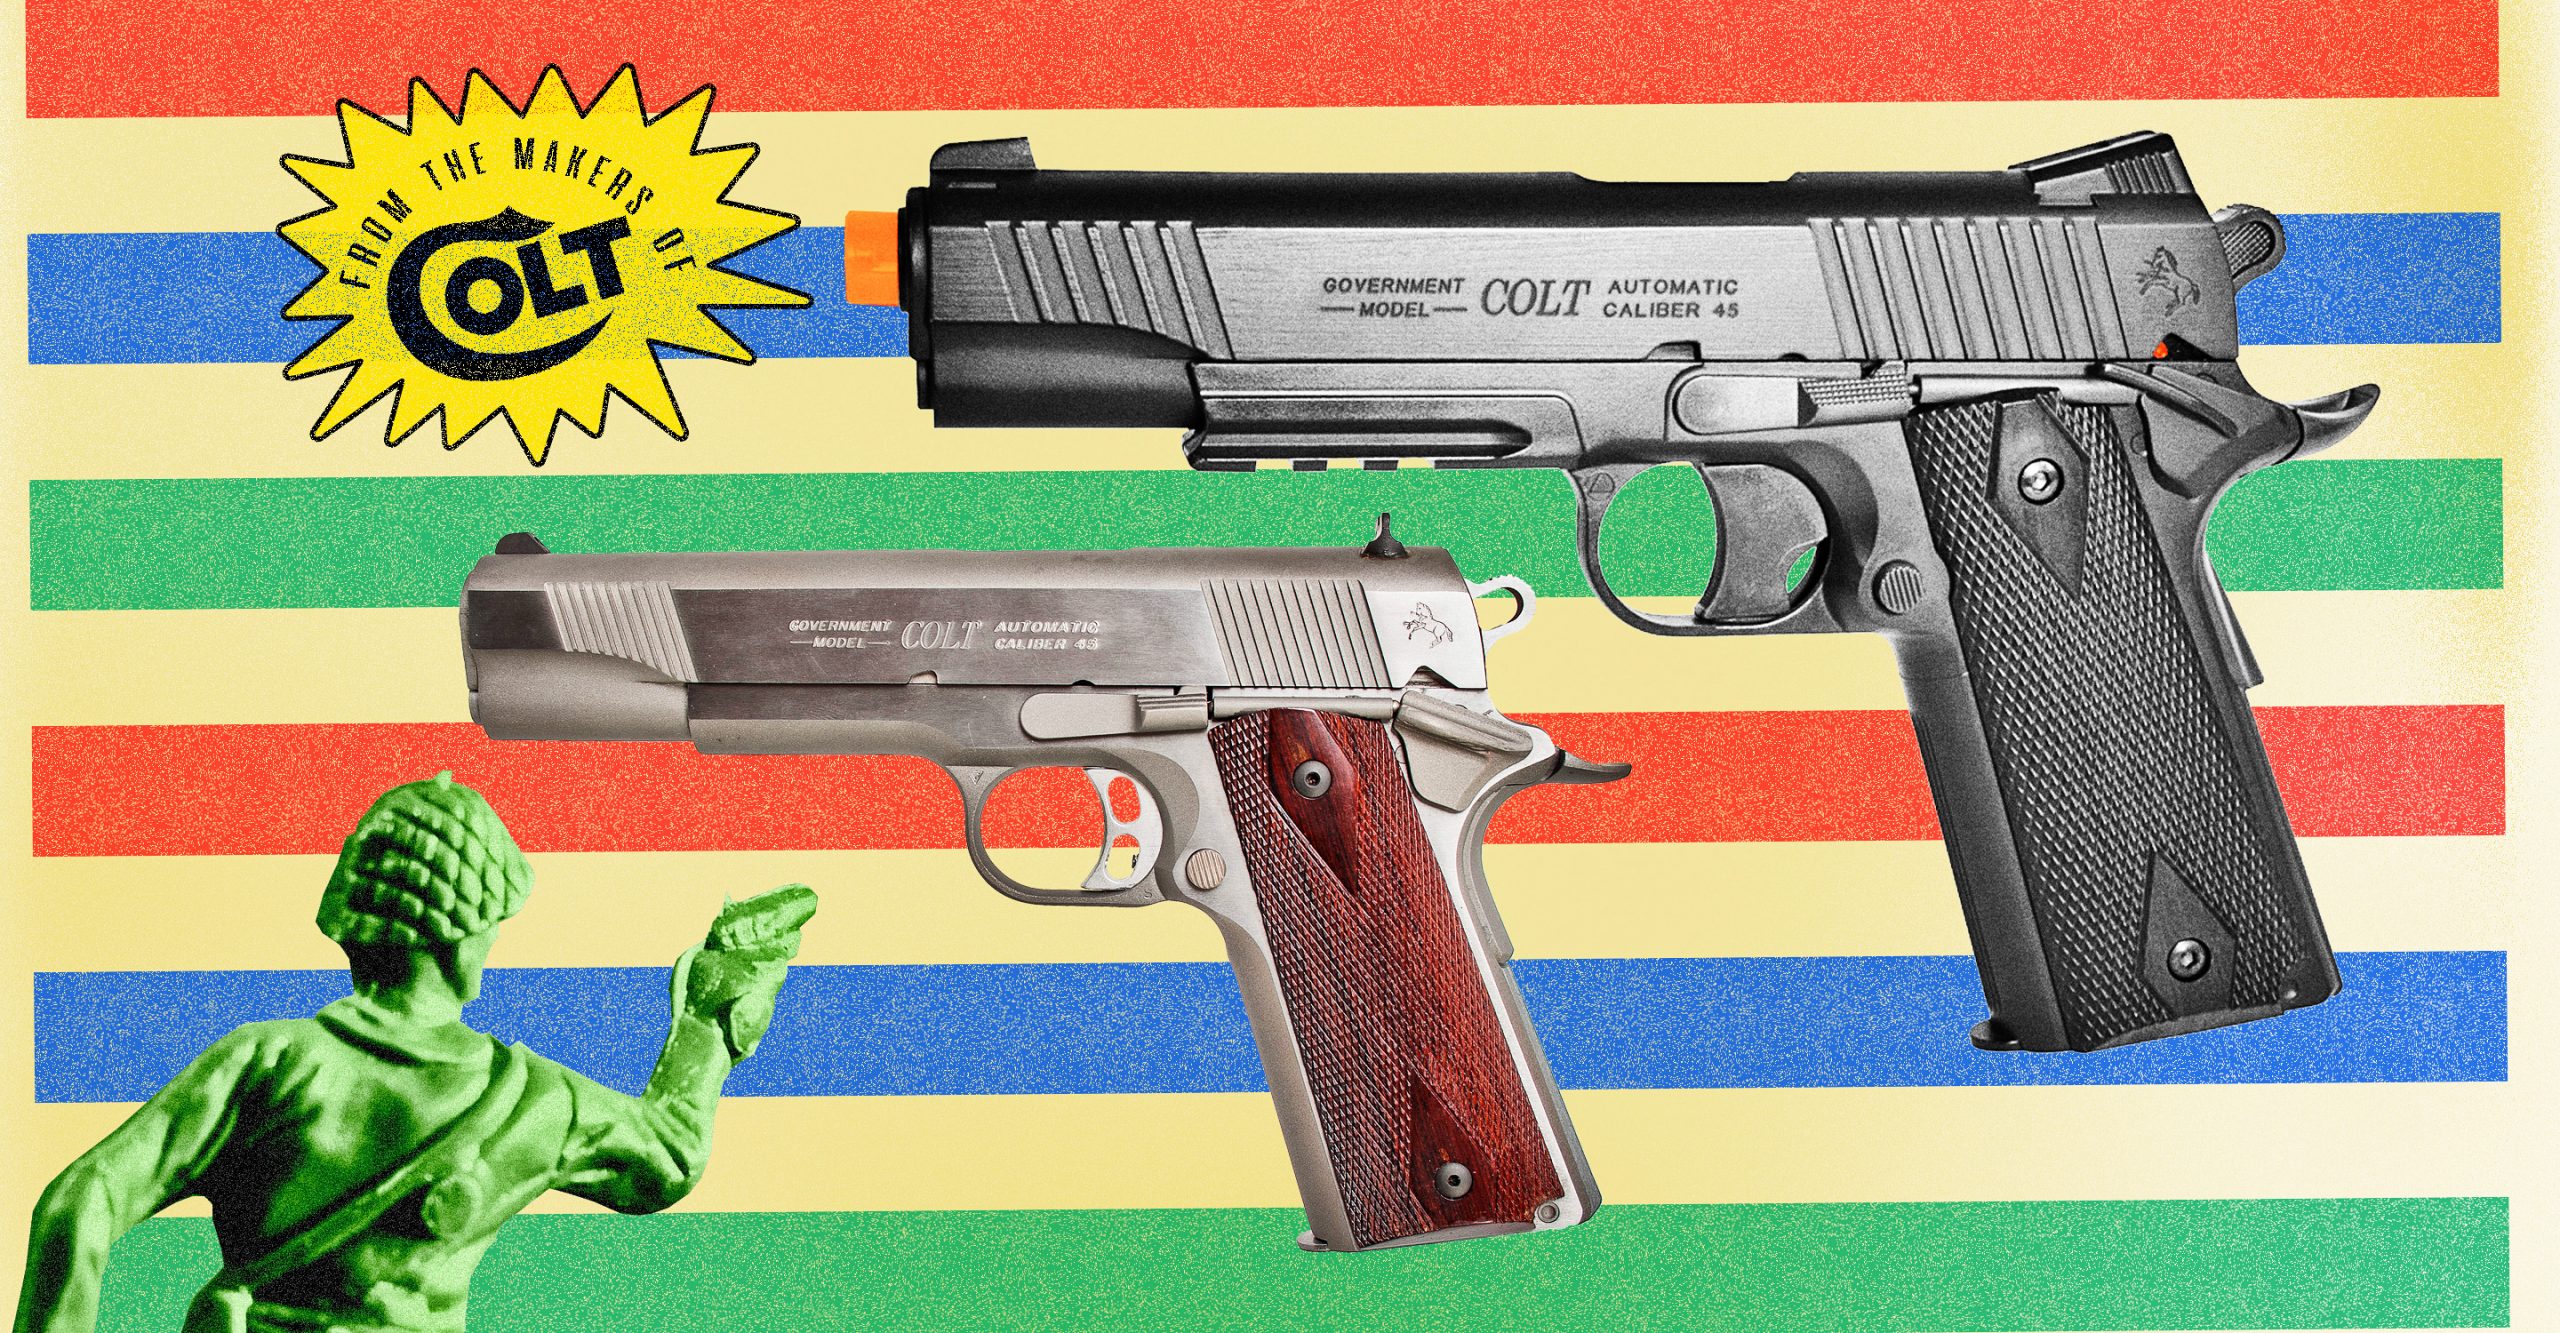 Gunmakers Are Profiting From Toy Replicas That Can Get Kids Killed